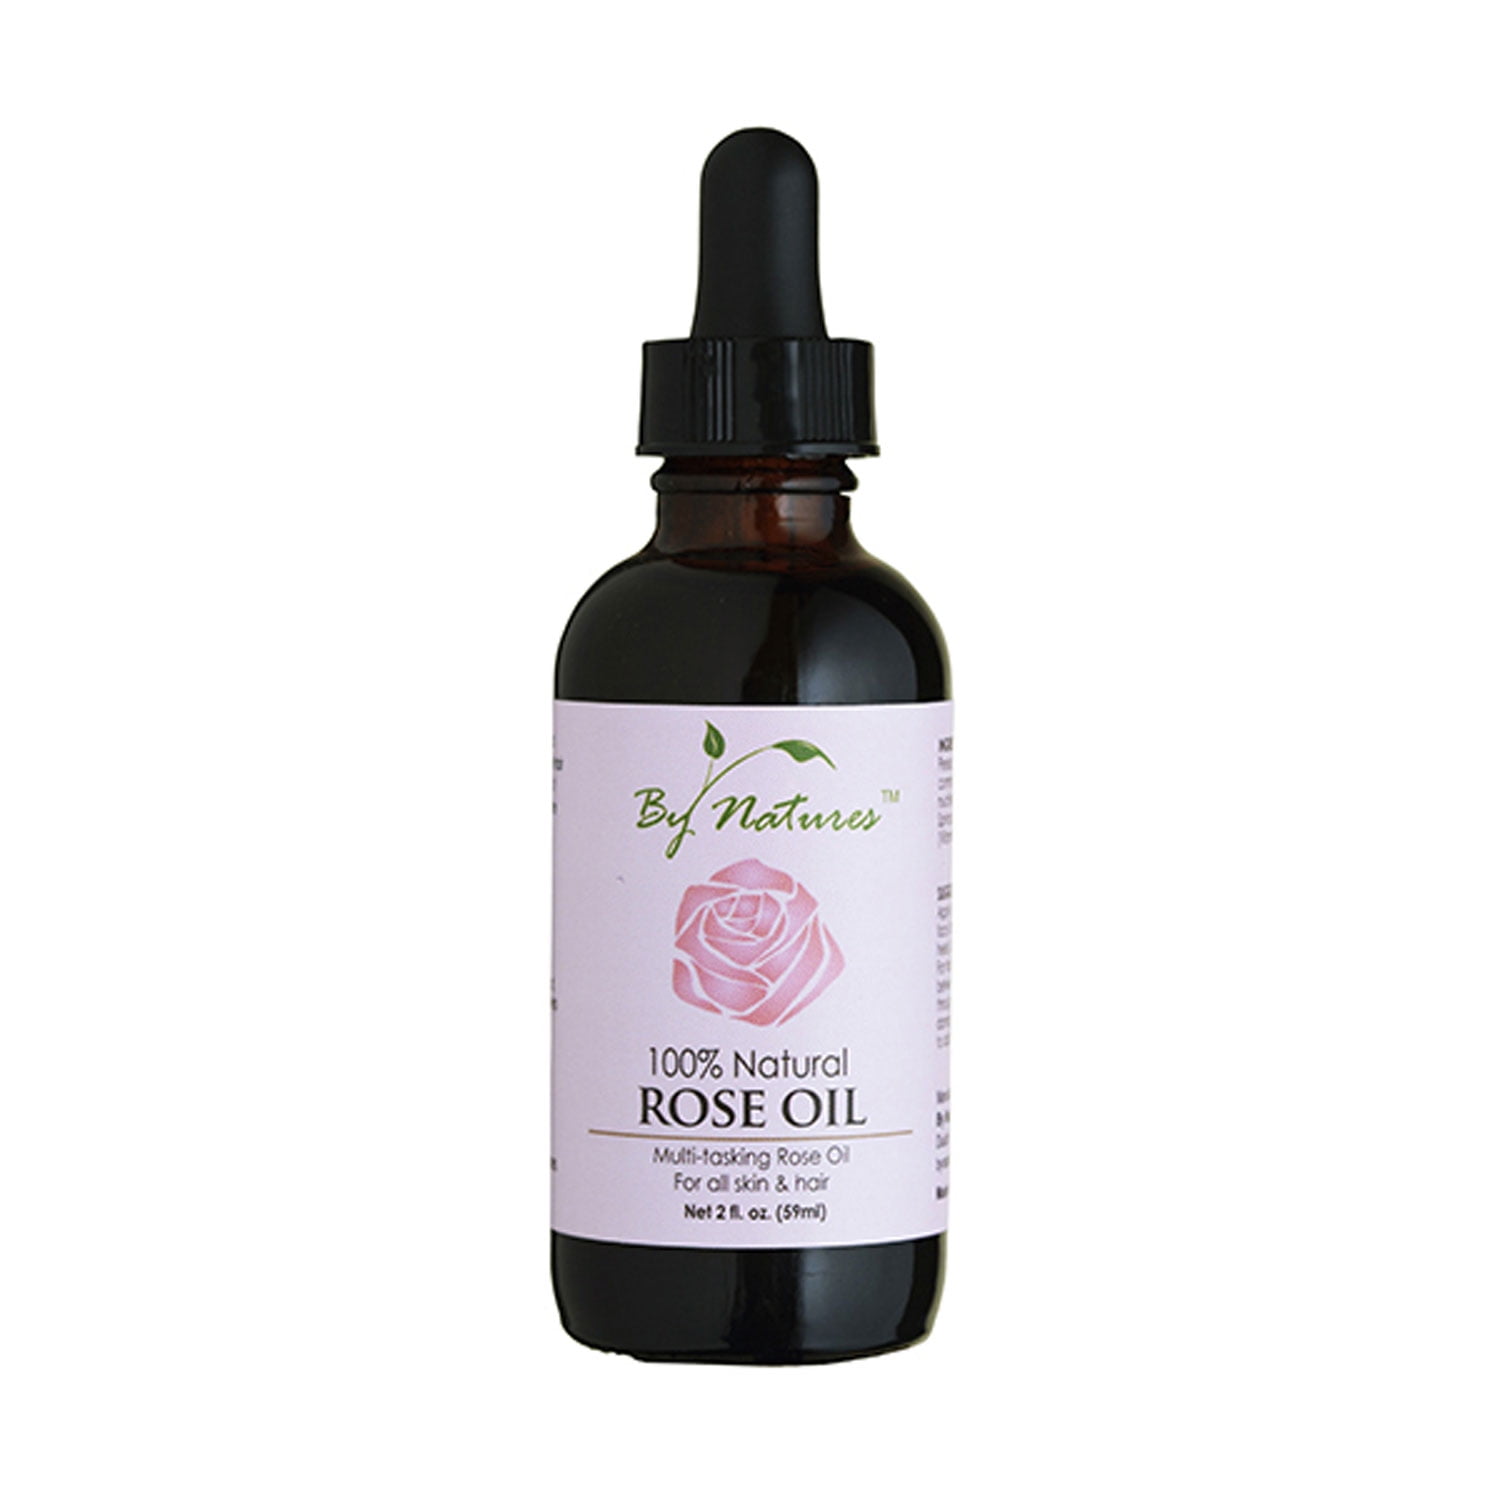 Nature's Oil All Natural Rosé Fragrance Oil, 16oz, 100% Natural, Phthalate,  Paraben, SLS + SLES Free, 100% Vegan, Cruelty Free